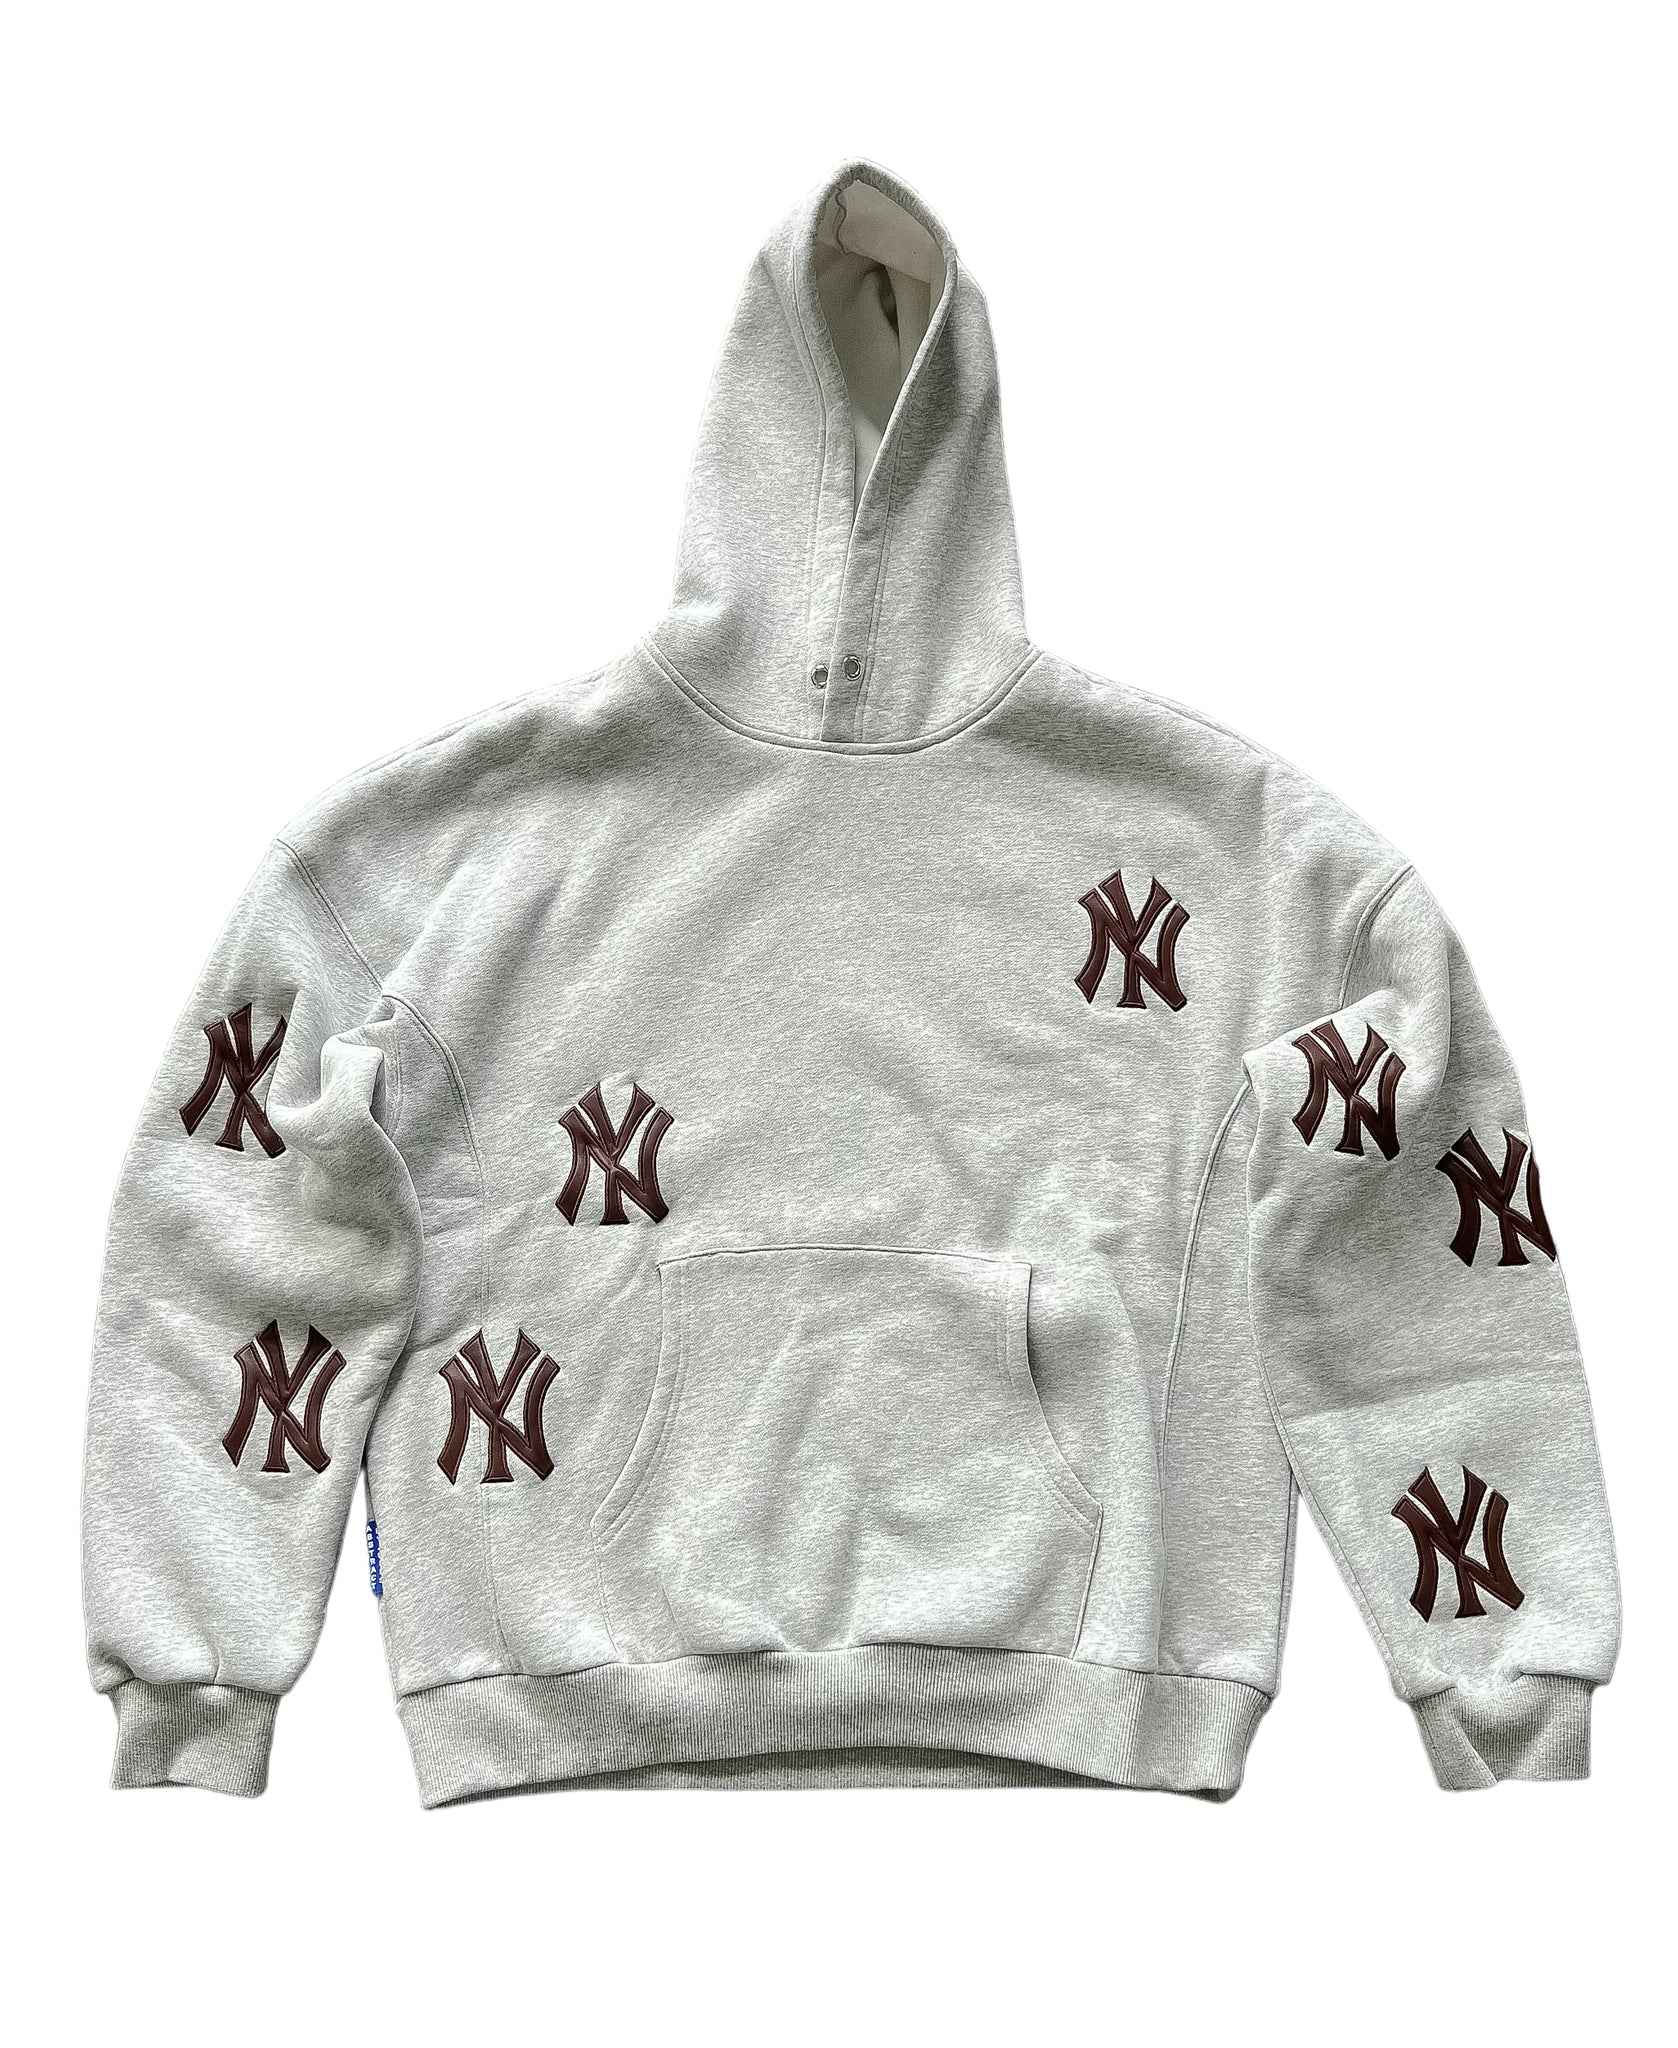 NY Patch Hoodie - Grey